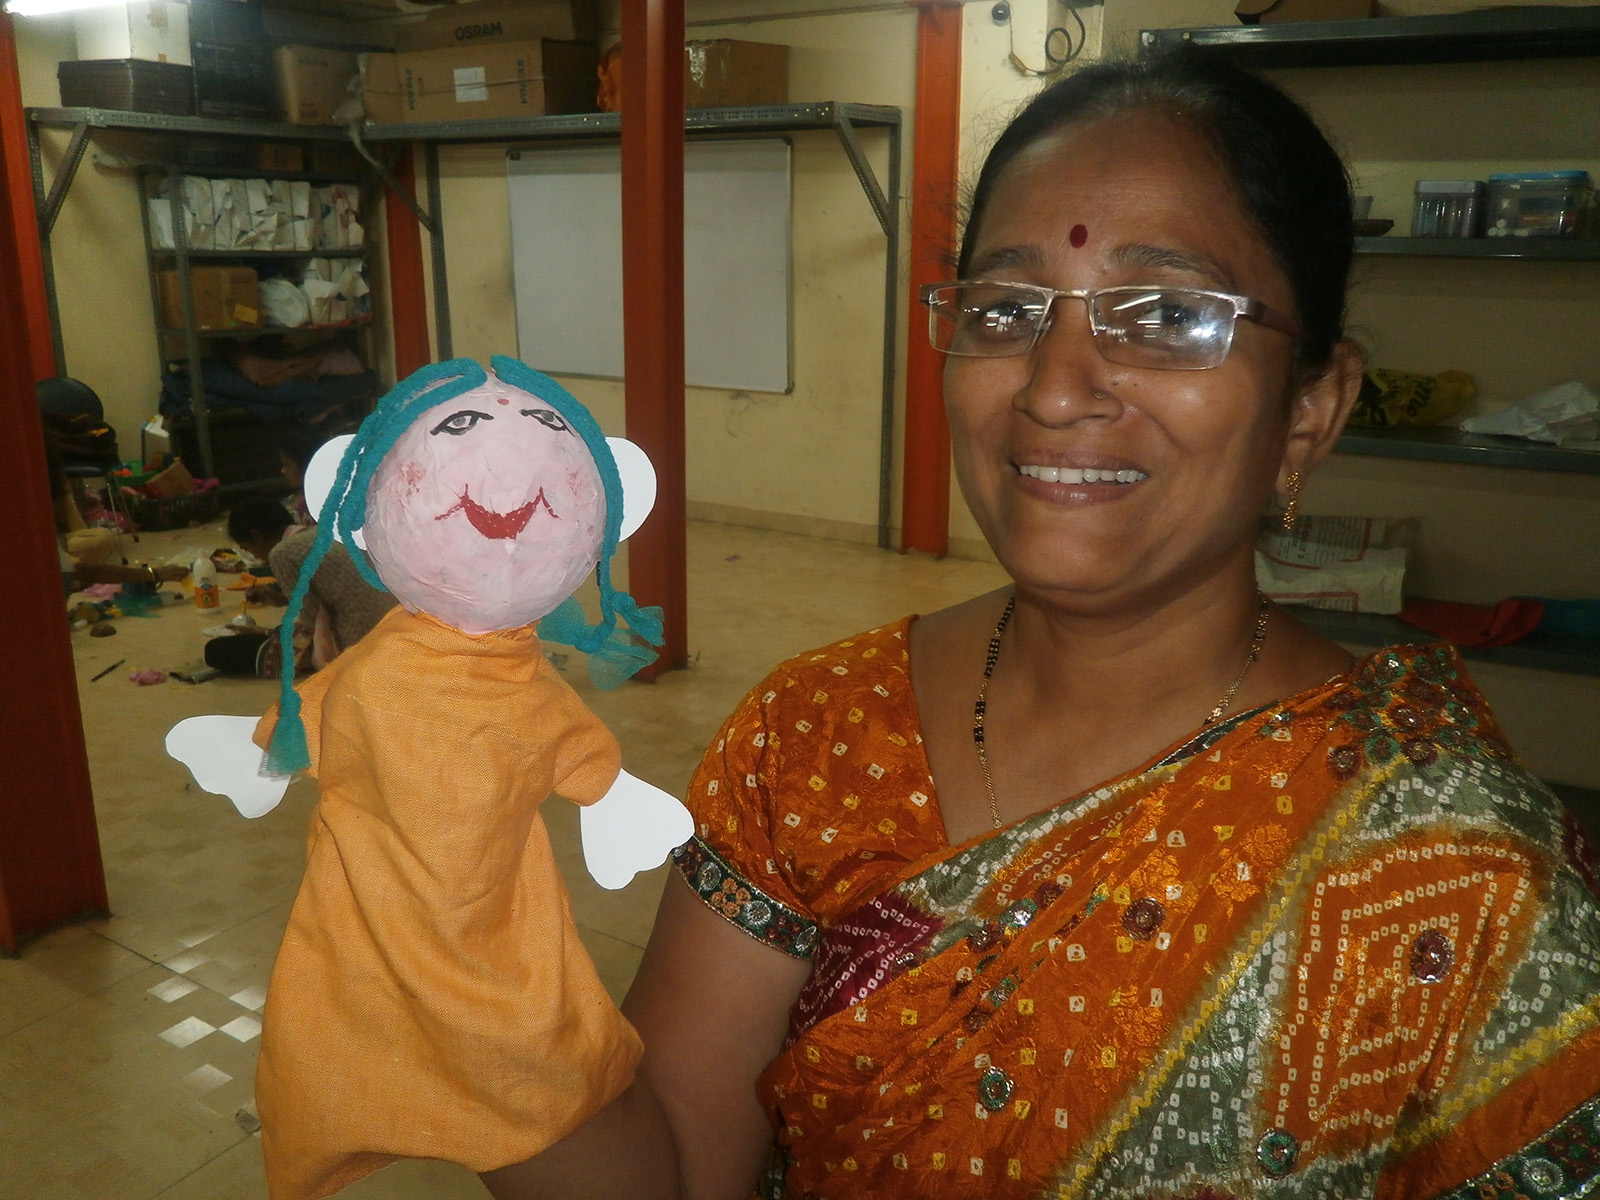 Learning to make a puppet was a great experience